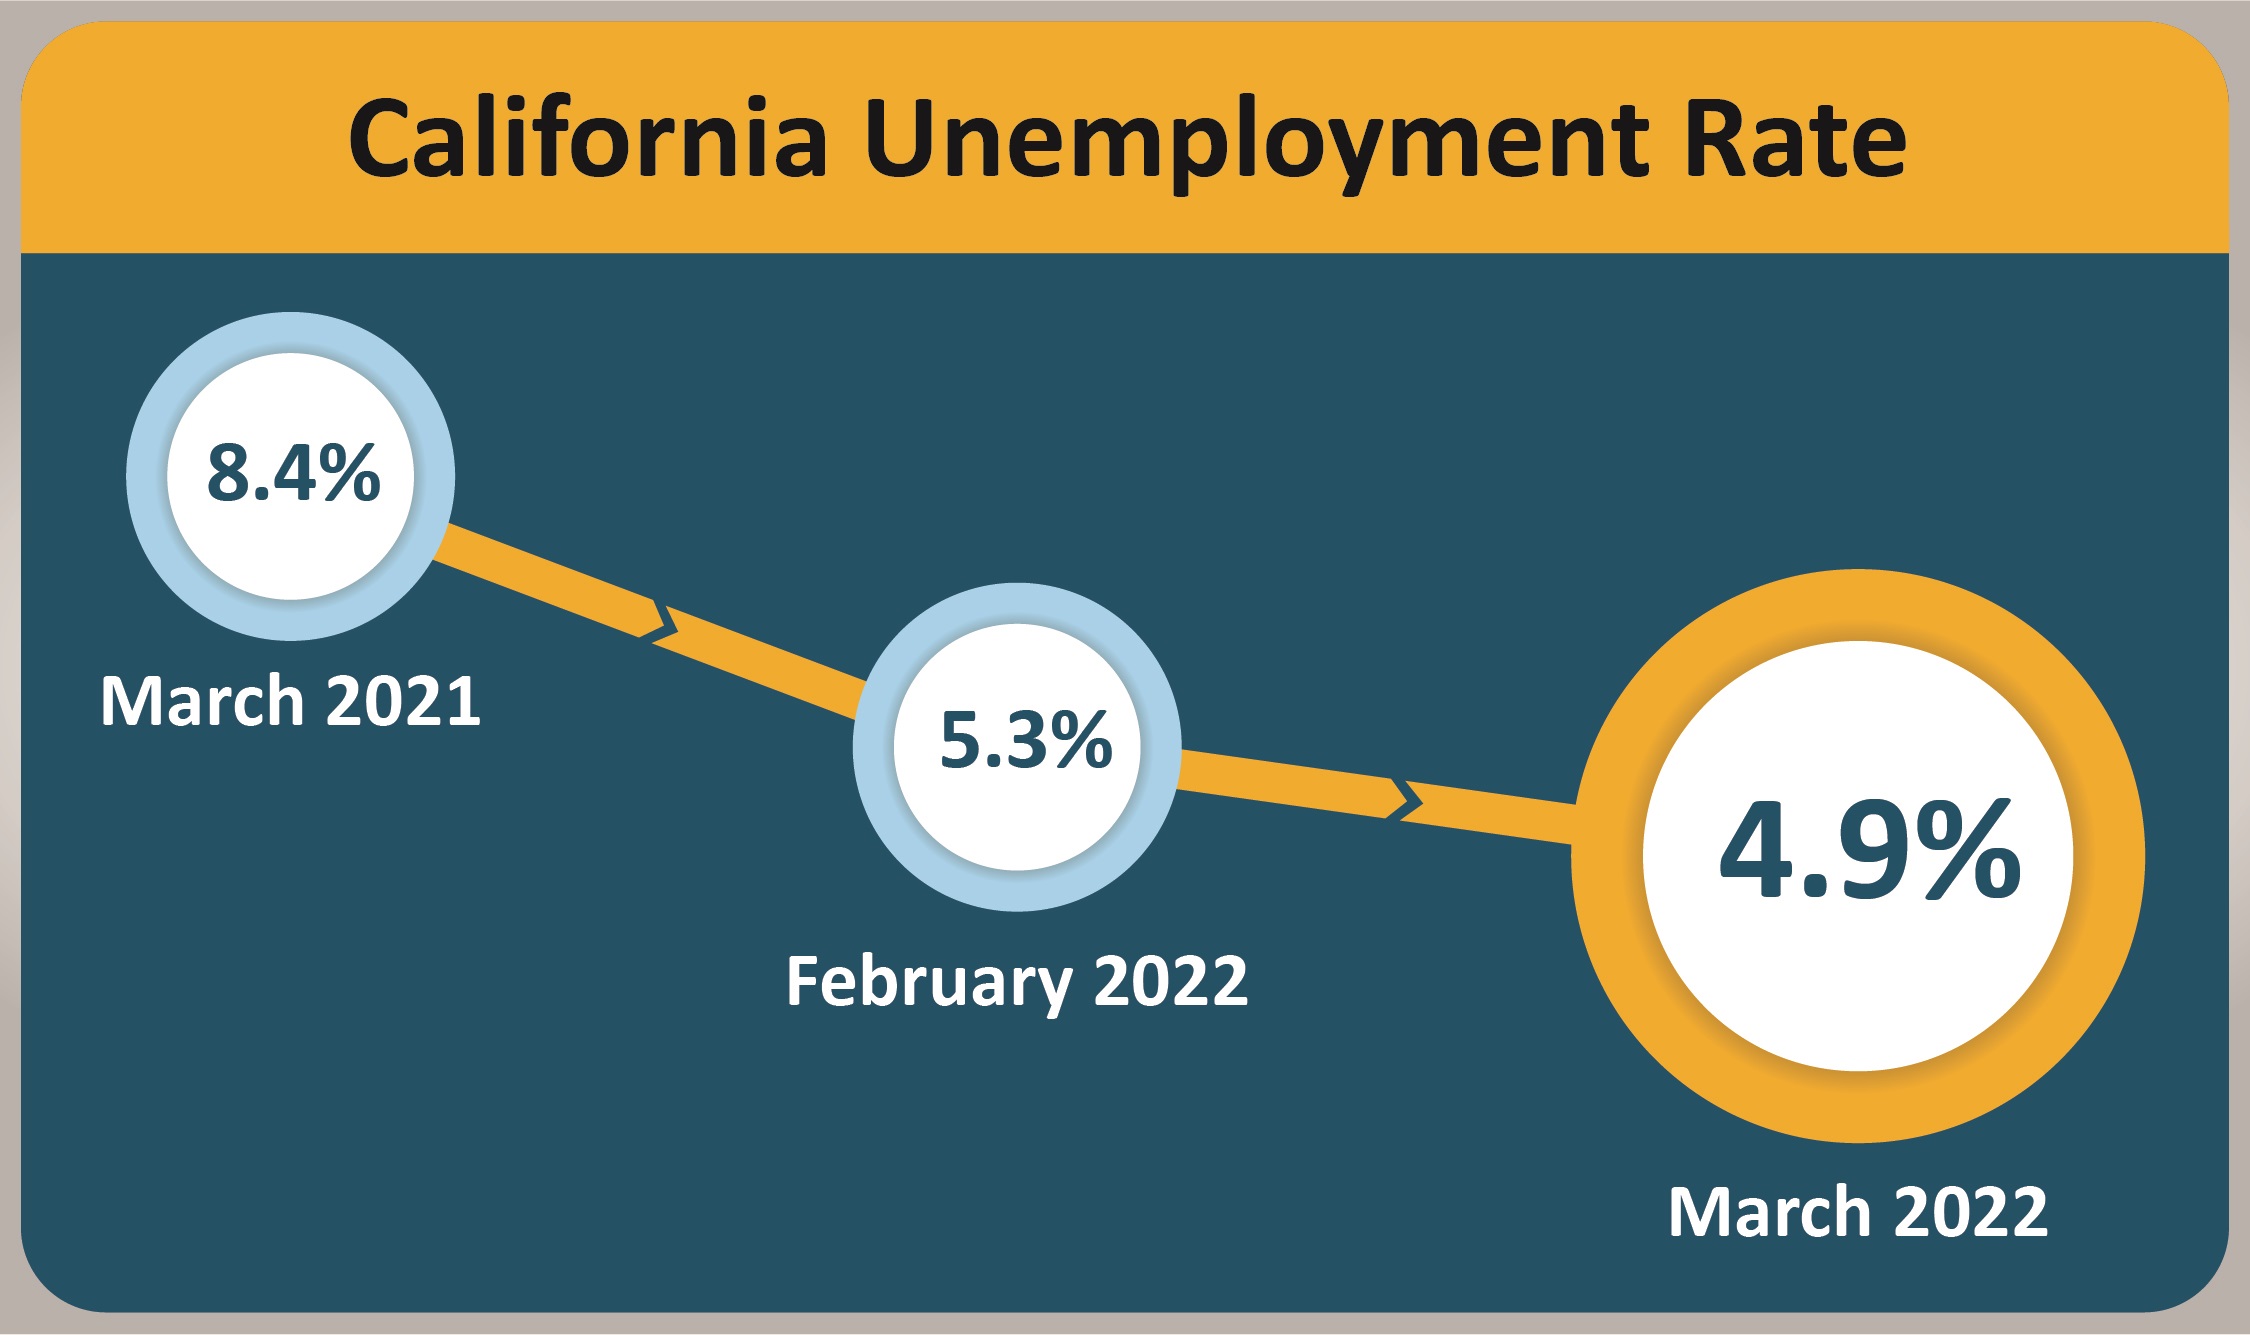 The California unemployment rate is 4.9 percent as of March, 2022.